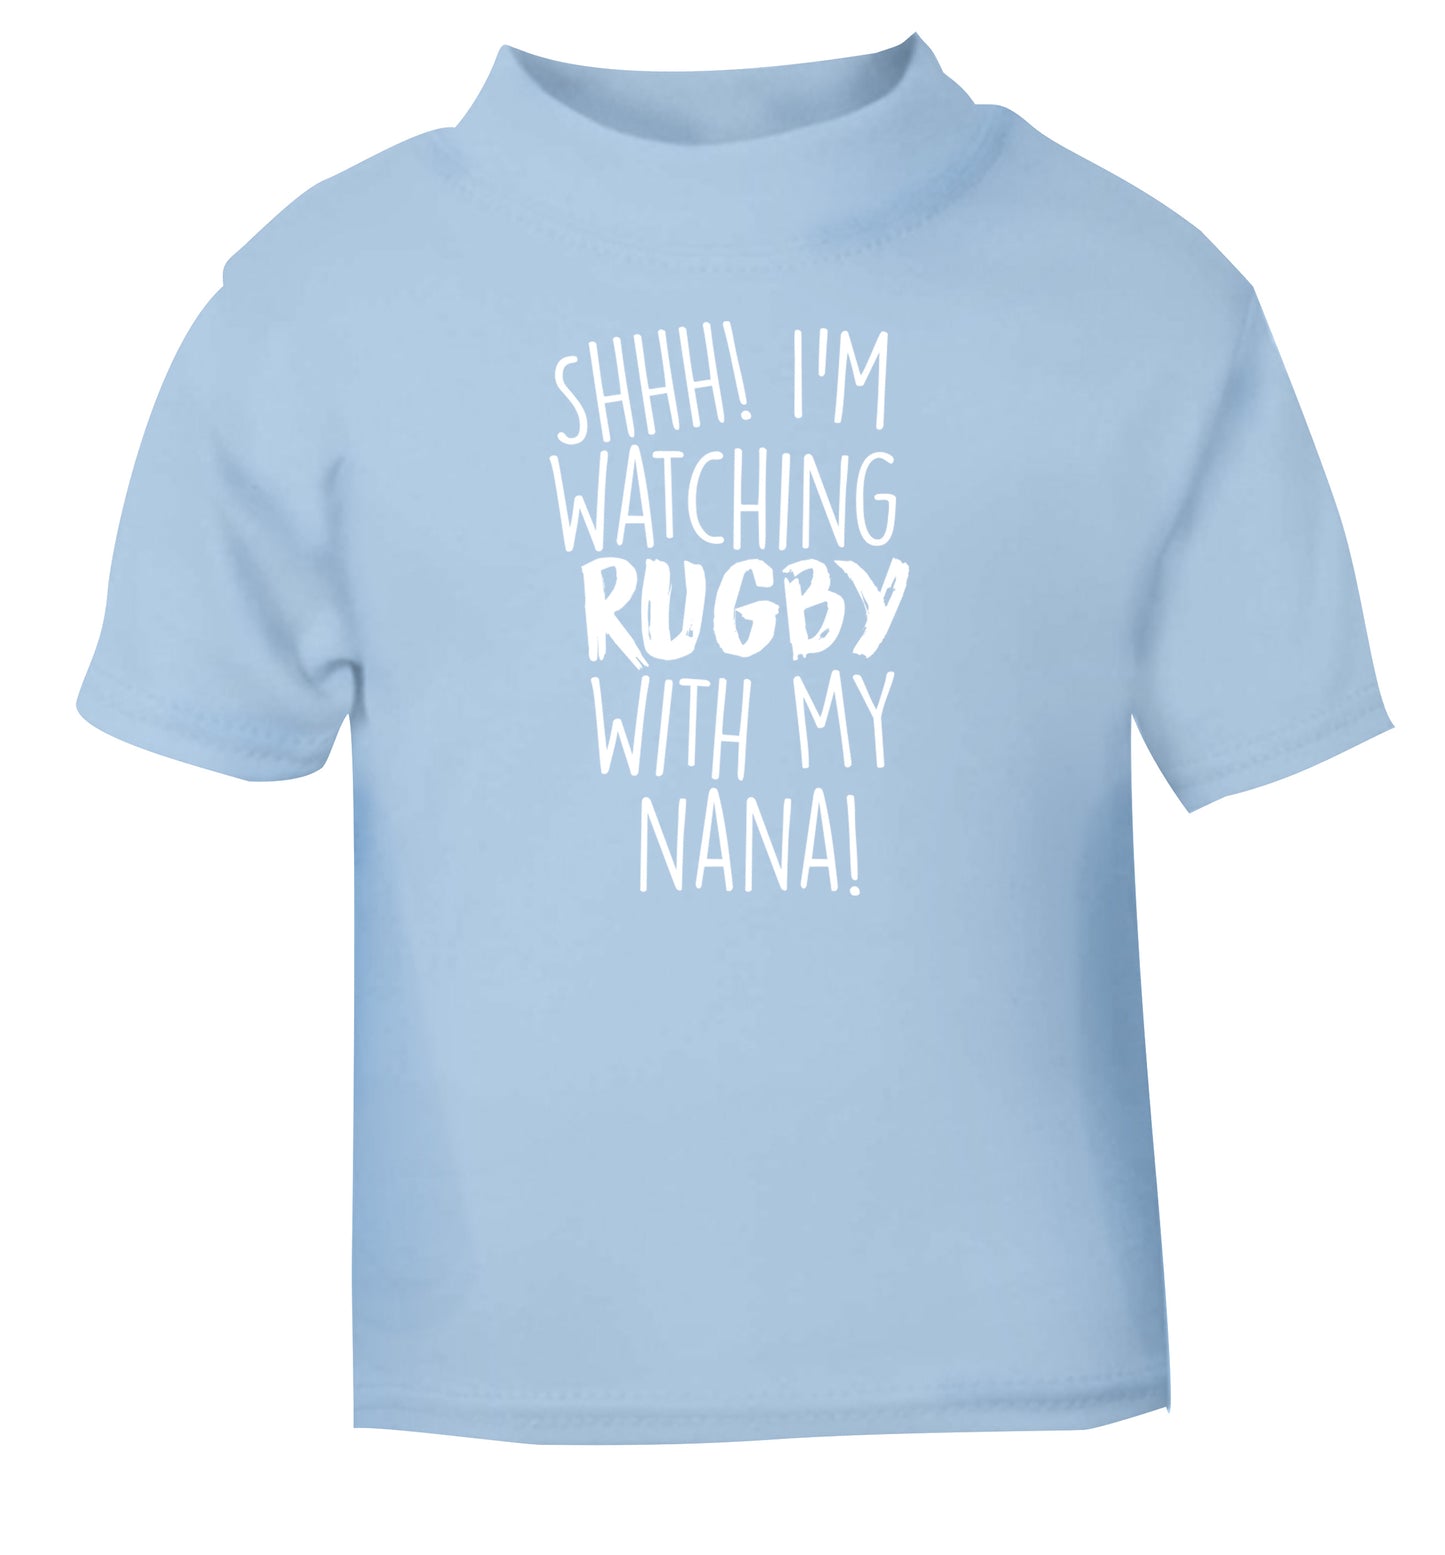 Shh I'm watching rugby with my nana light blue Baby Toddler Tshirt 2 Years